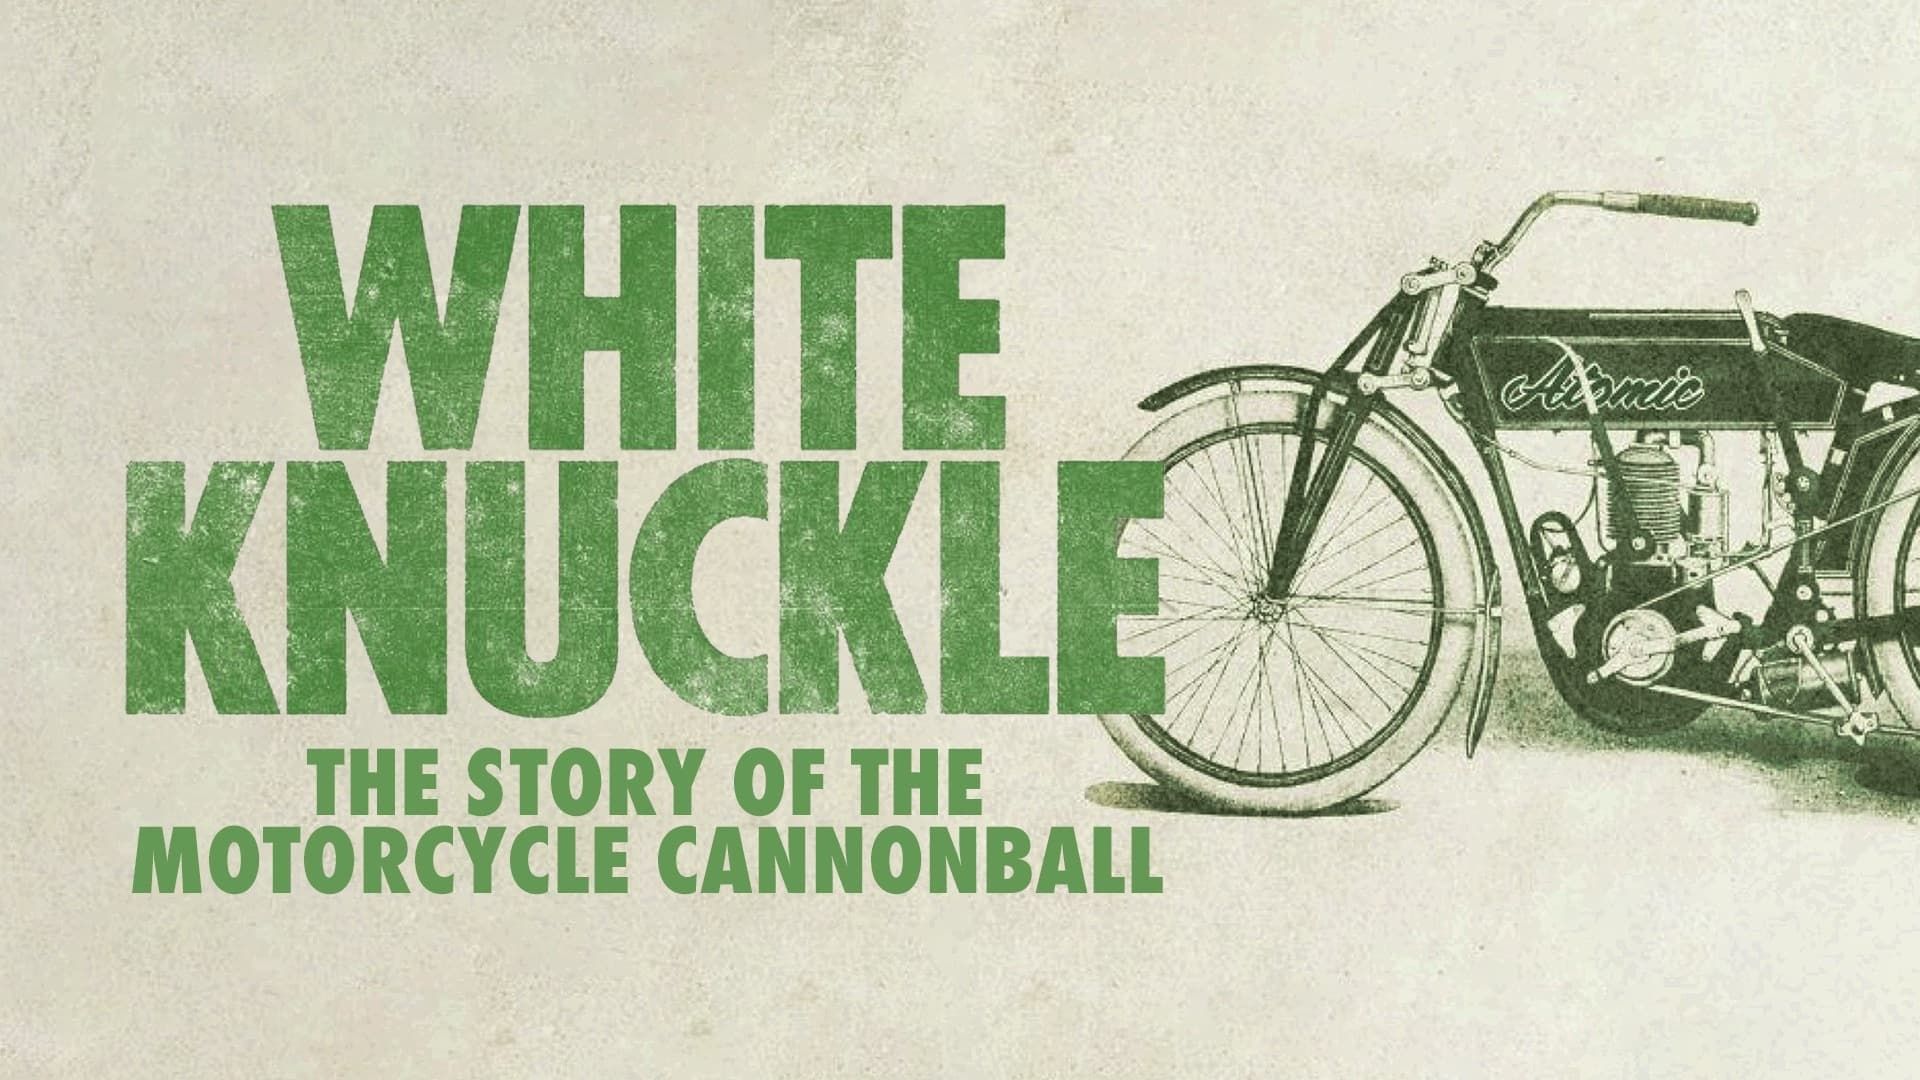 White Knuckle: The Story of the Motorcycle Cannonball background